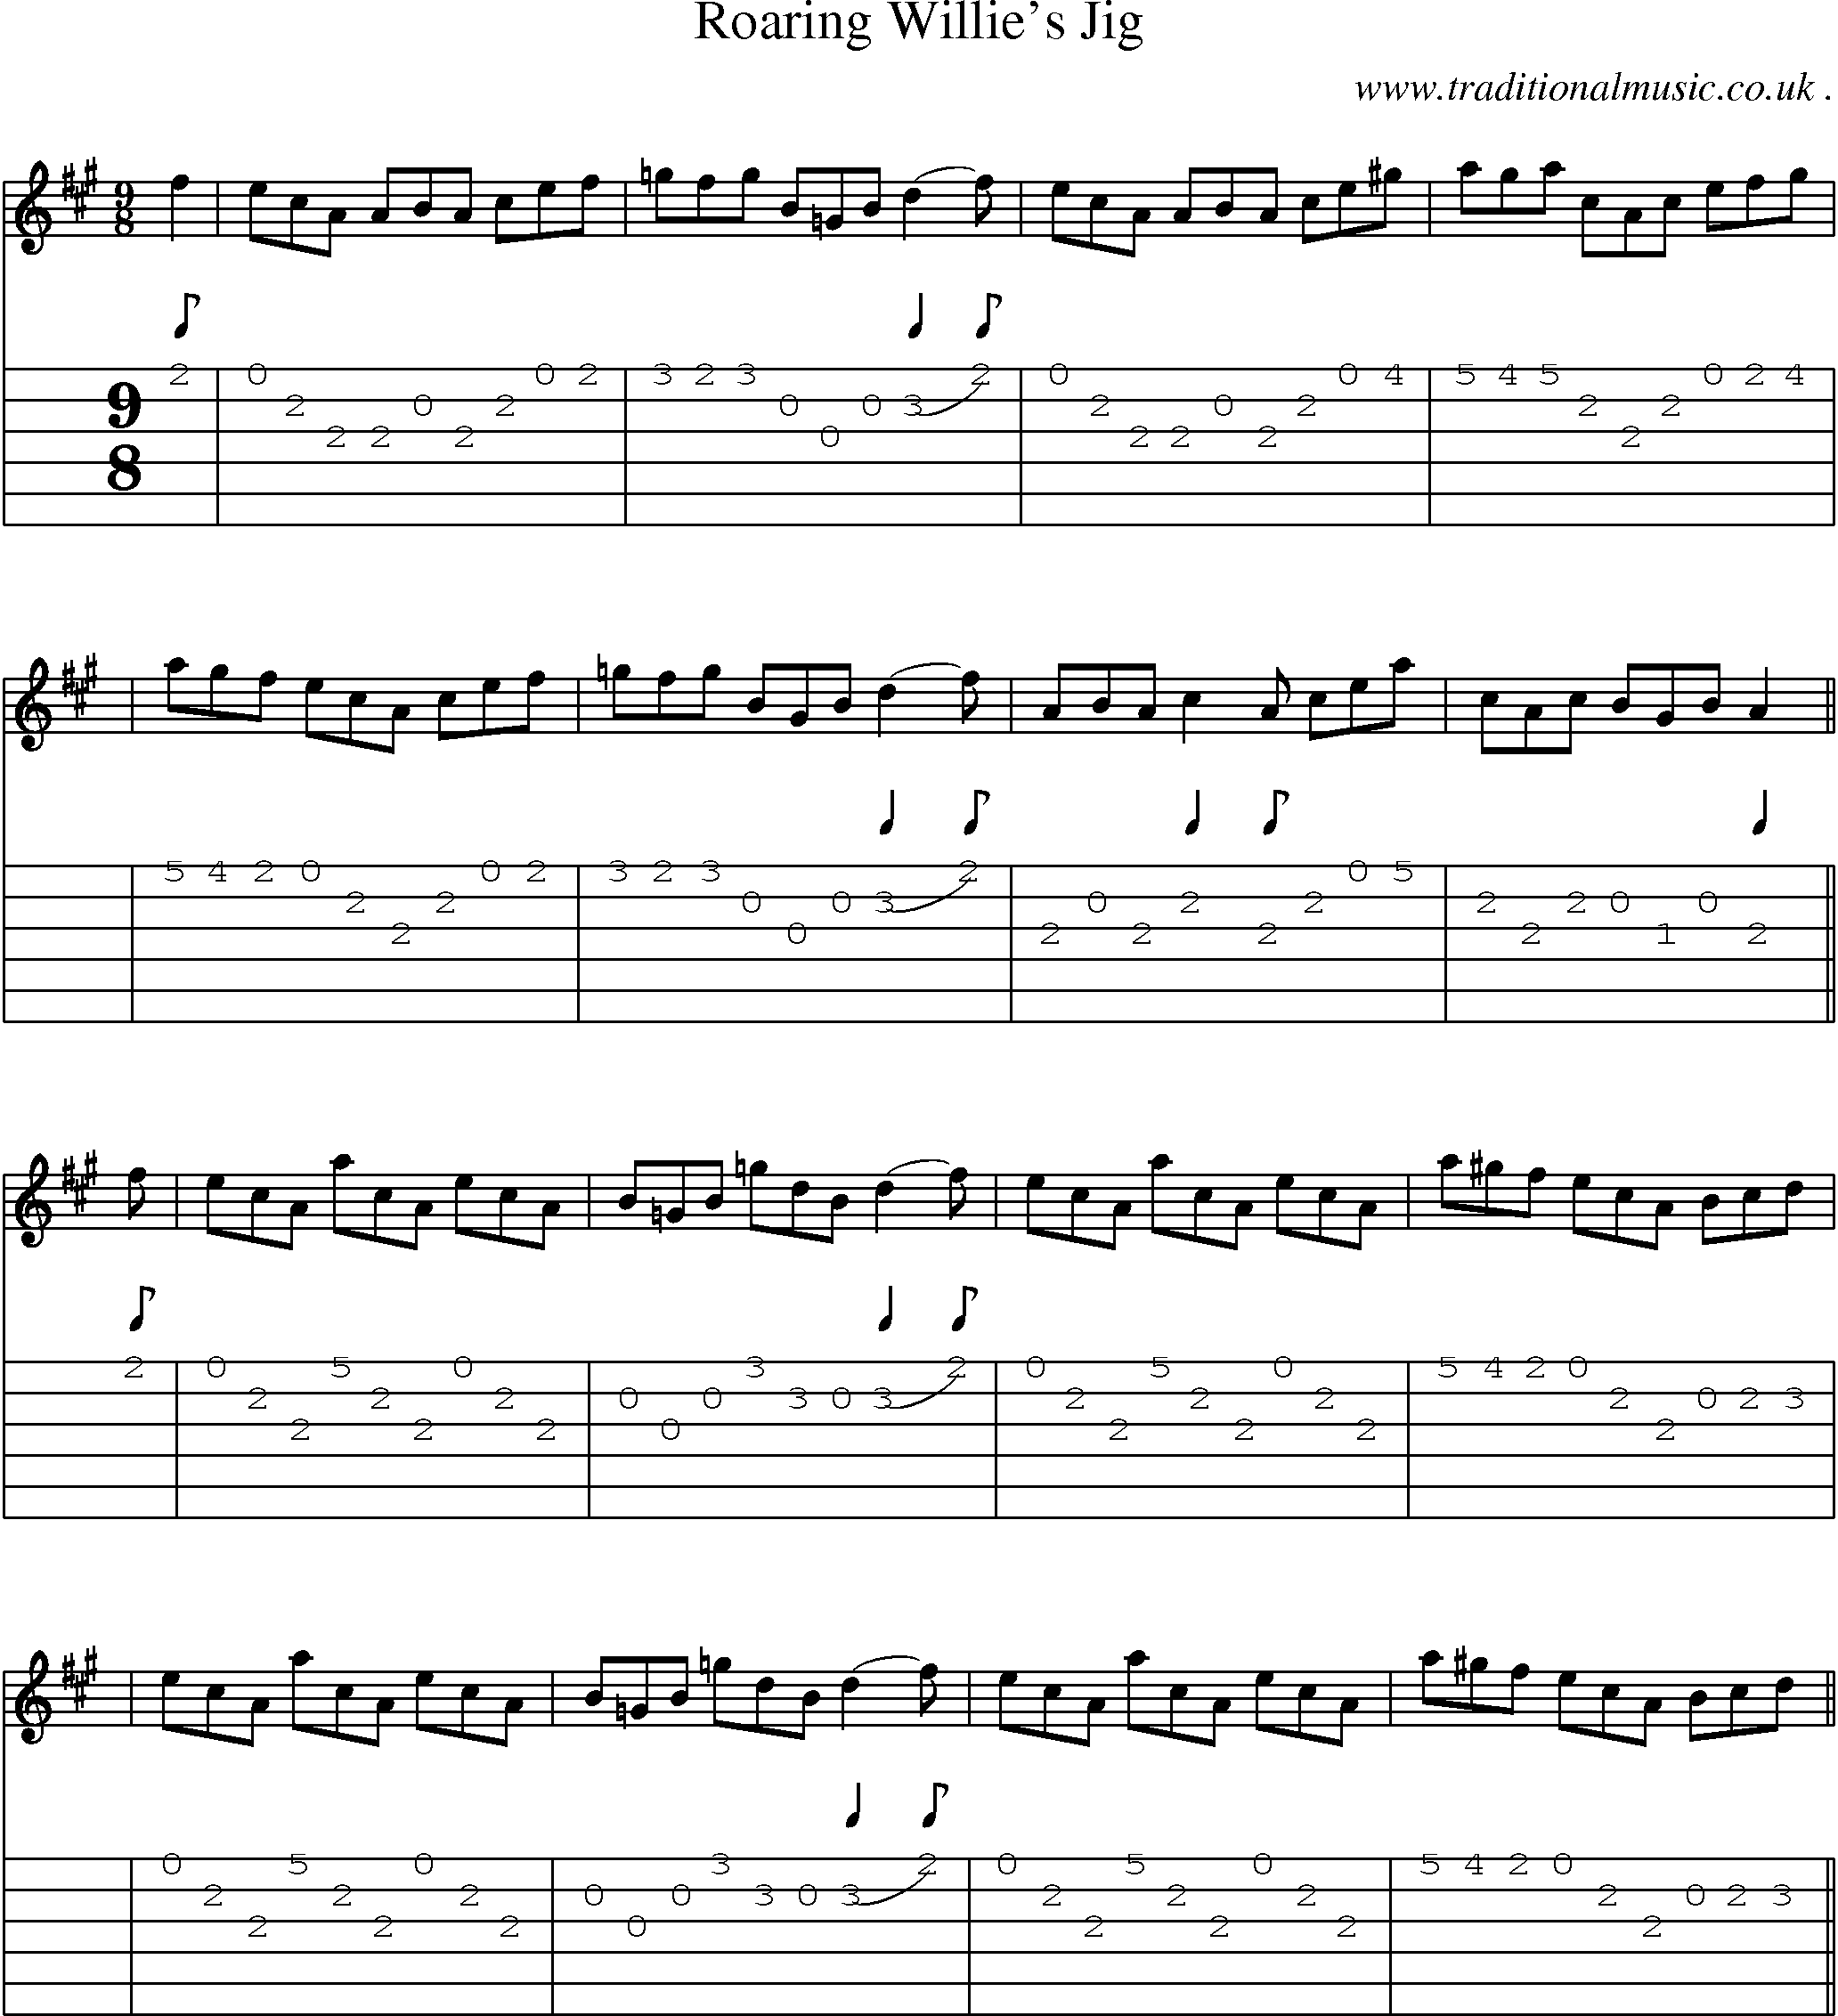 Sheet-Music and Guitar Tabs for Roaring Willies Jig